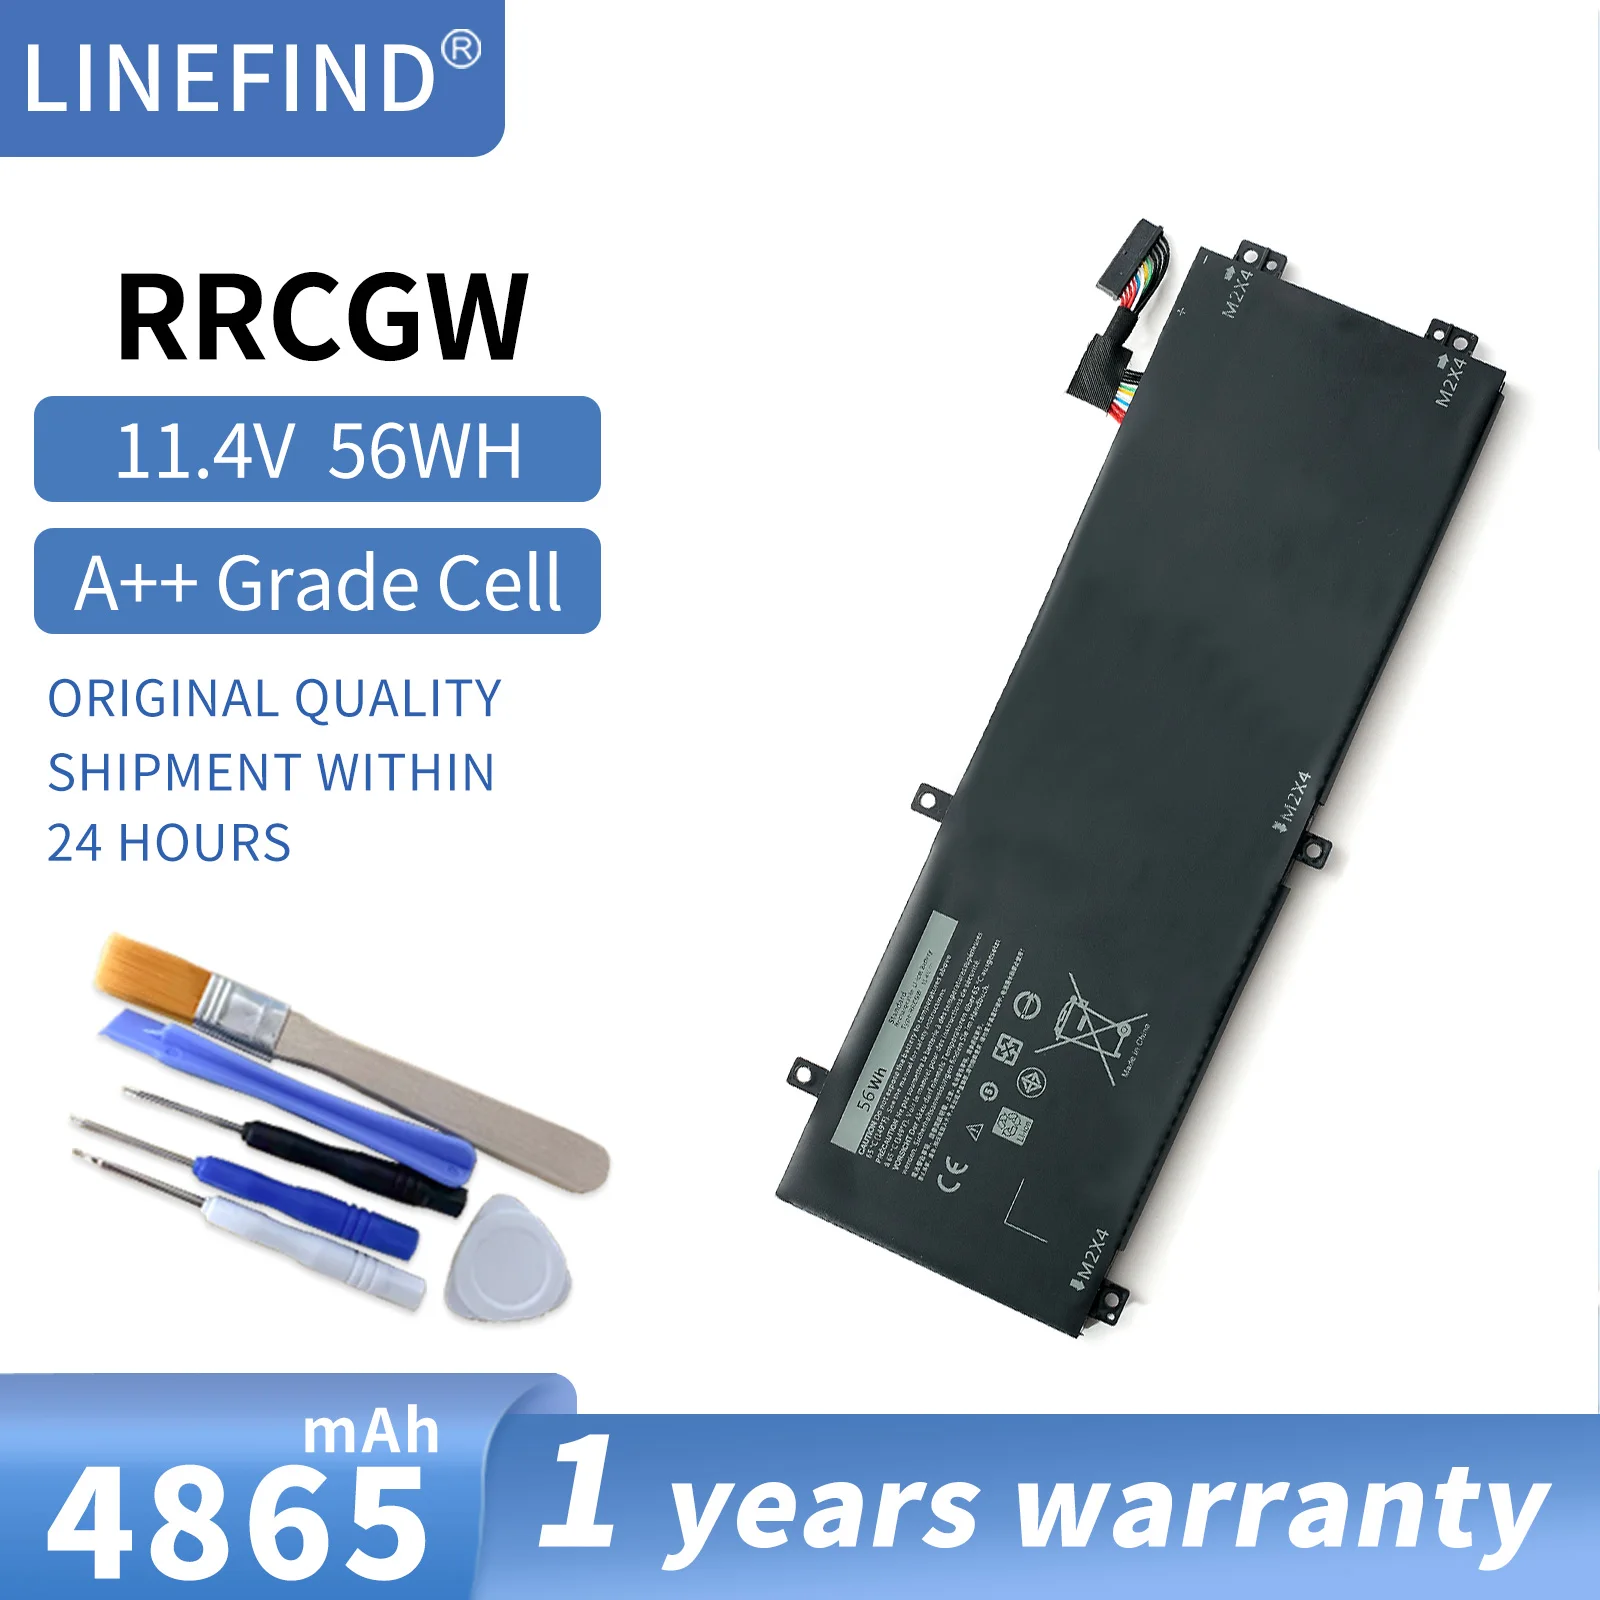 

New 4GVGH RRCGW Laptop Battery for DELL Precision 5510 XPS 15 9550 Series 1P6KD T453X Free Tools